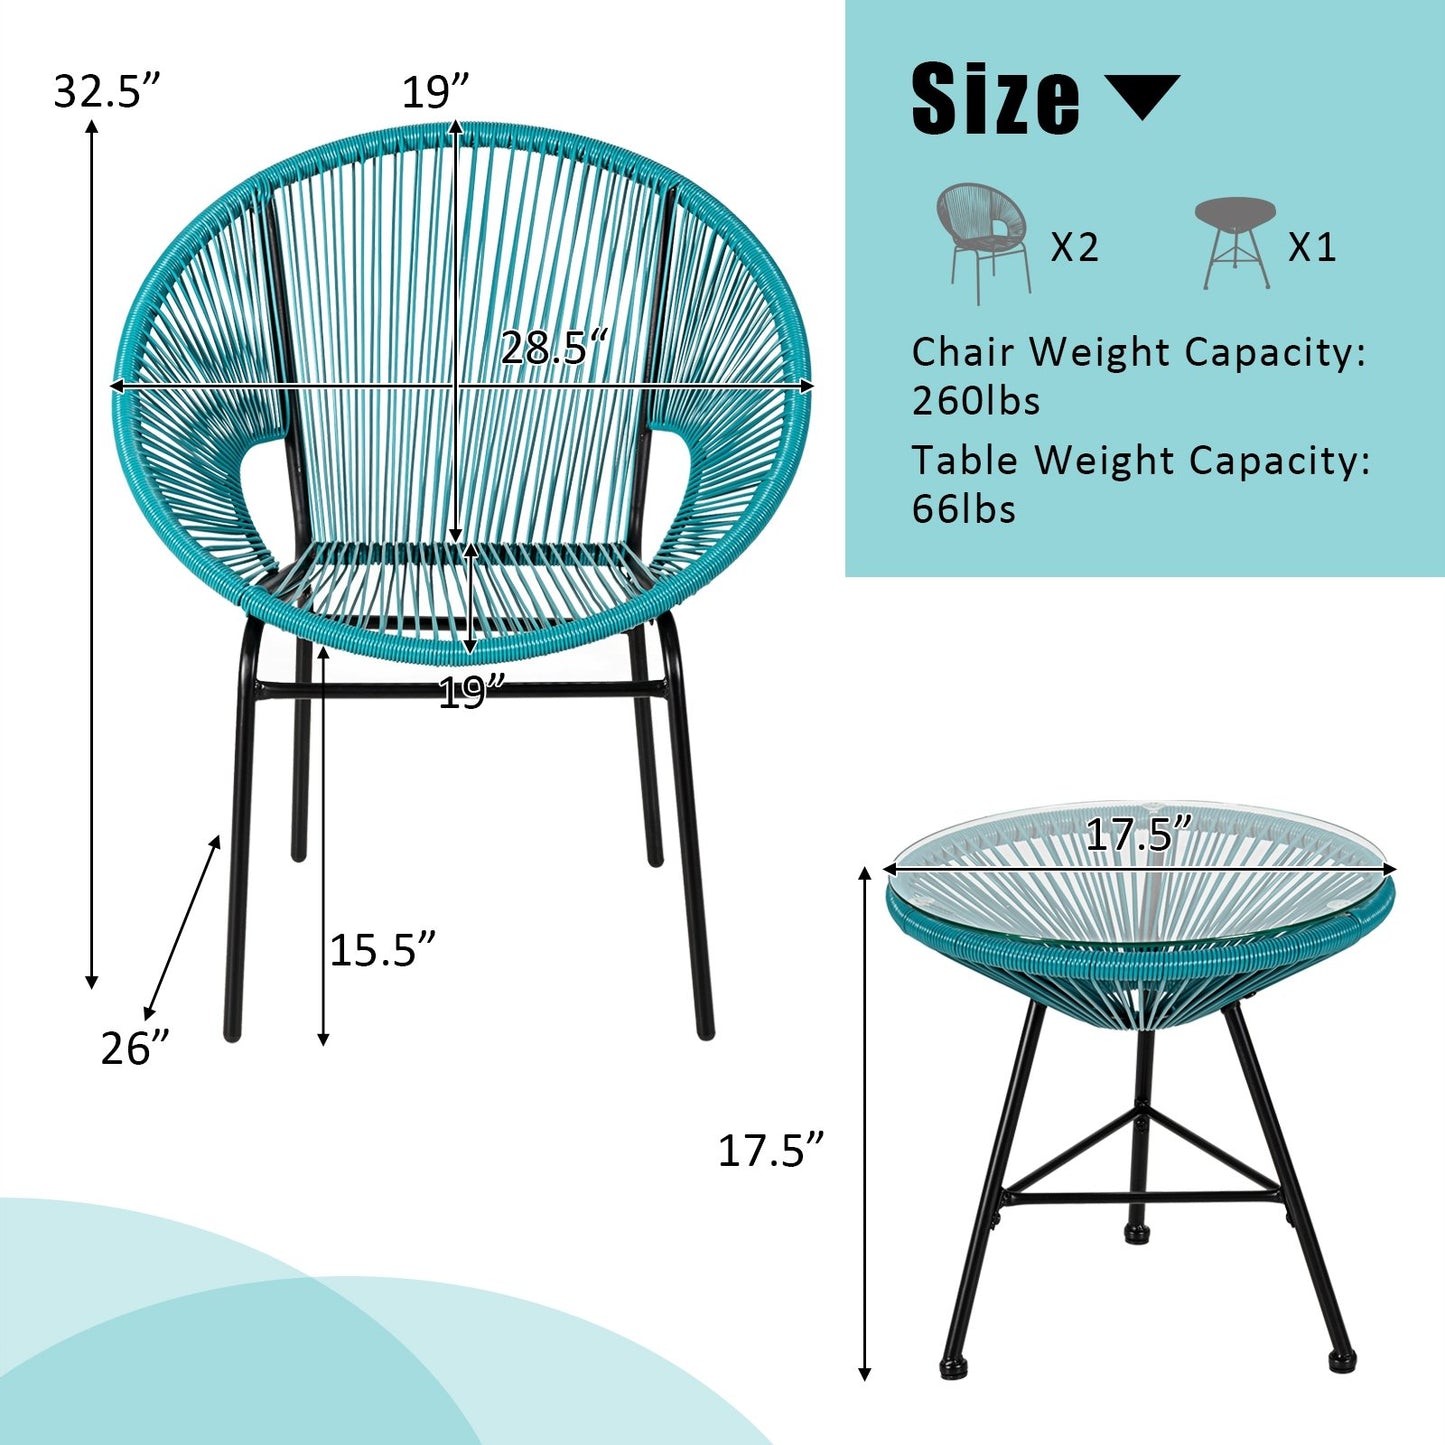 3PCS Patio Acapulco Furniture Bistro Set with GlassTable, Turquoise - Gallery Canada